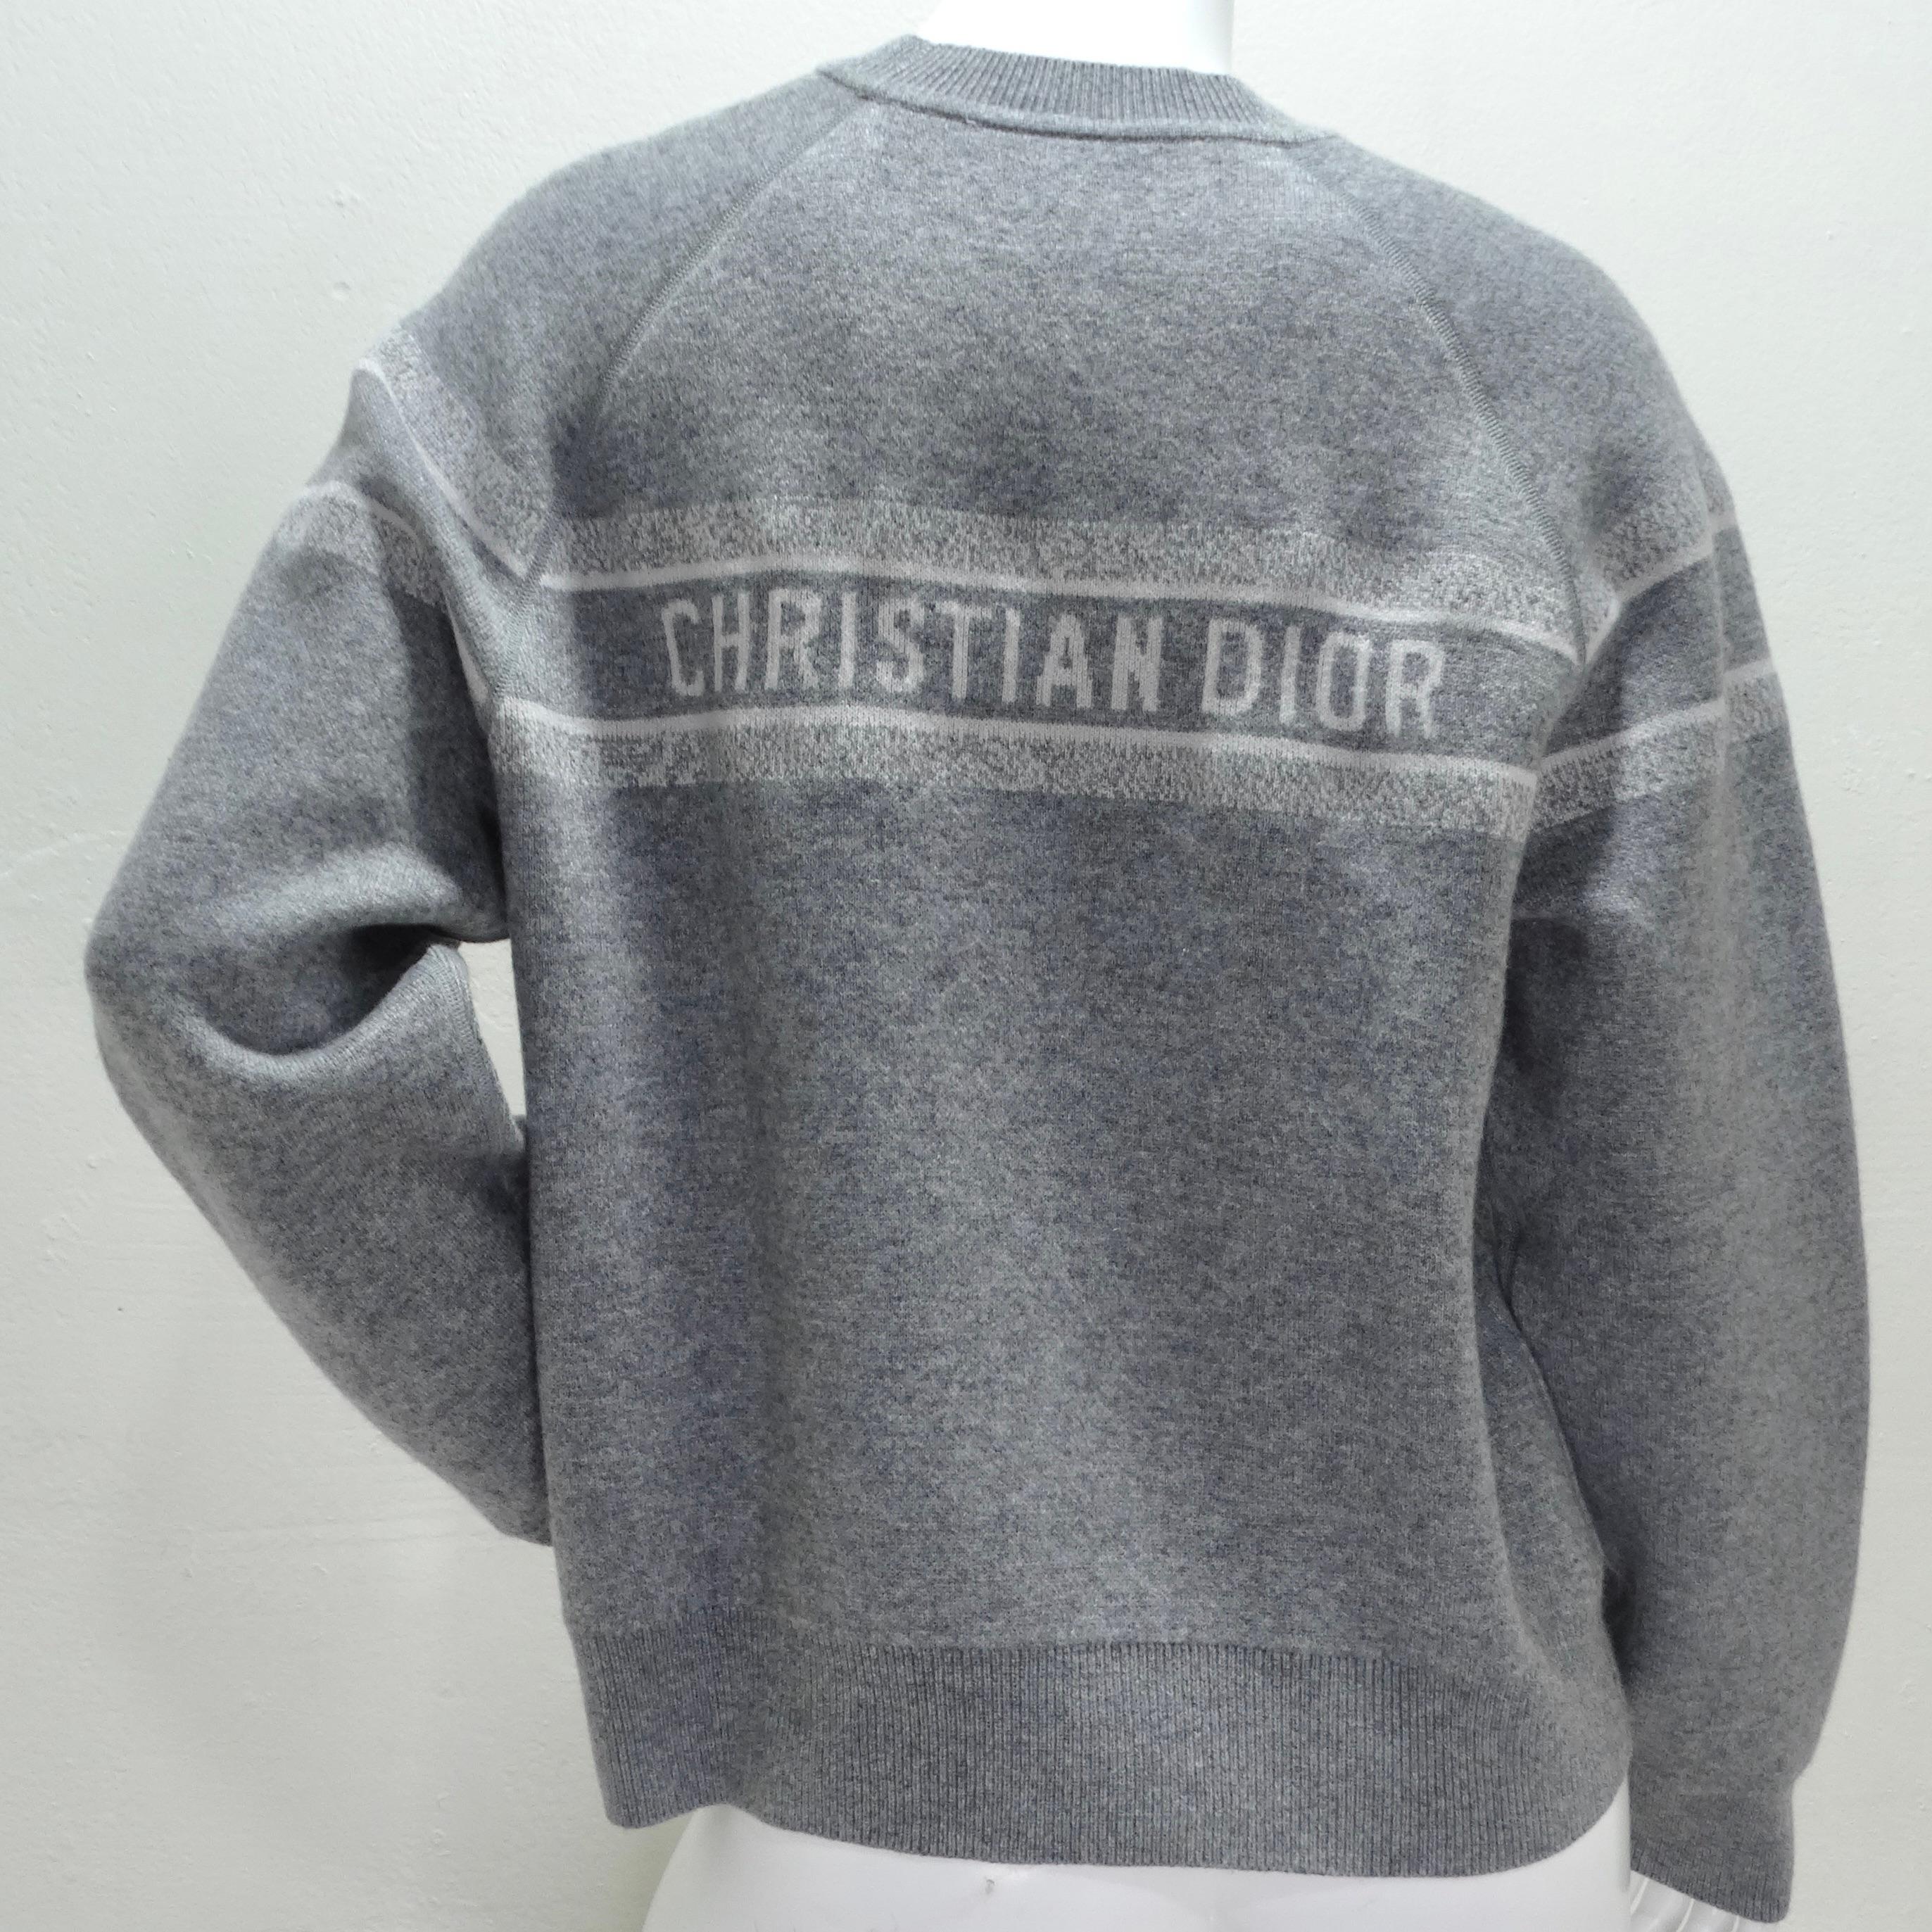 Christian Dior Oblique Reversible Cashmere Knit Sweater  In Excellent Condition For Sale In Scottsdale, AZ